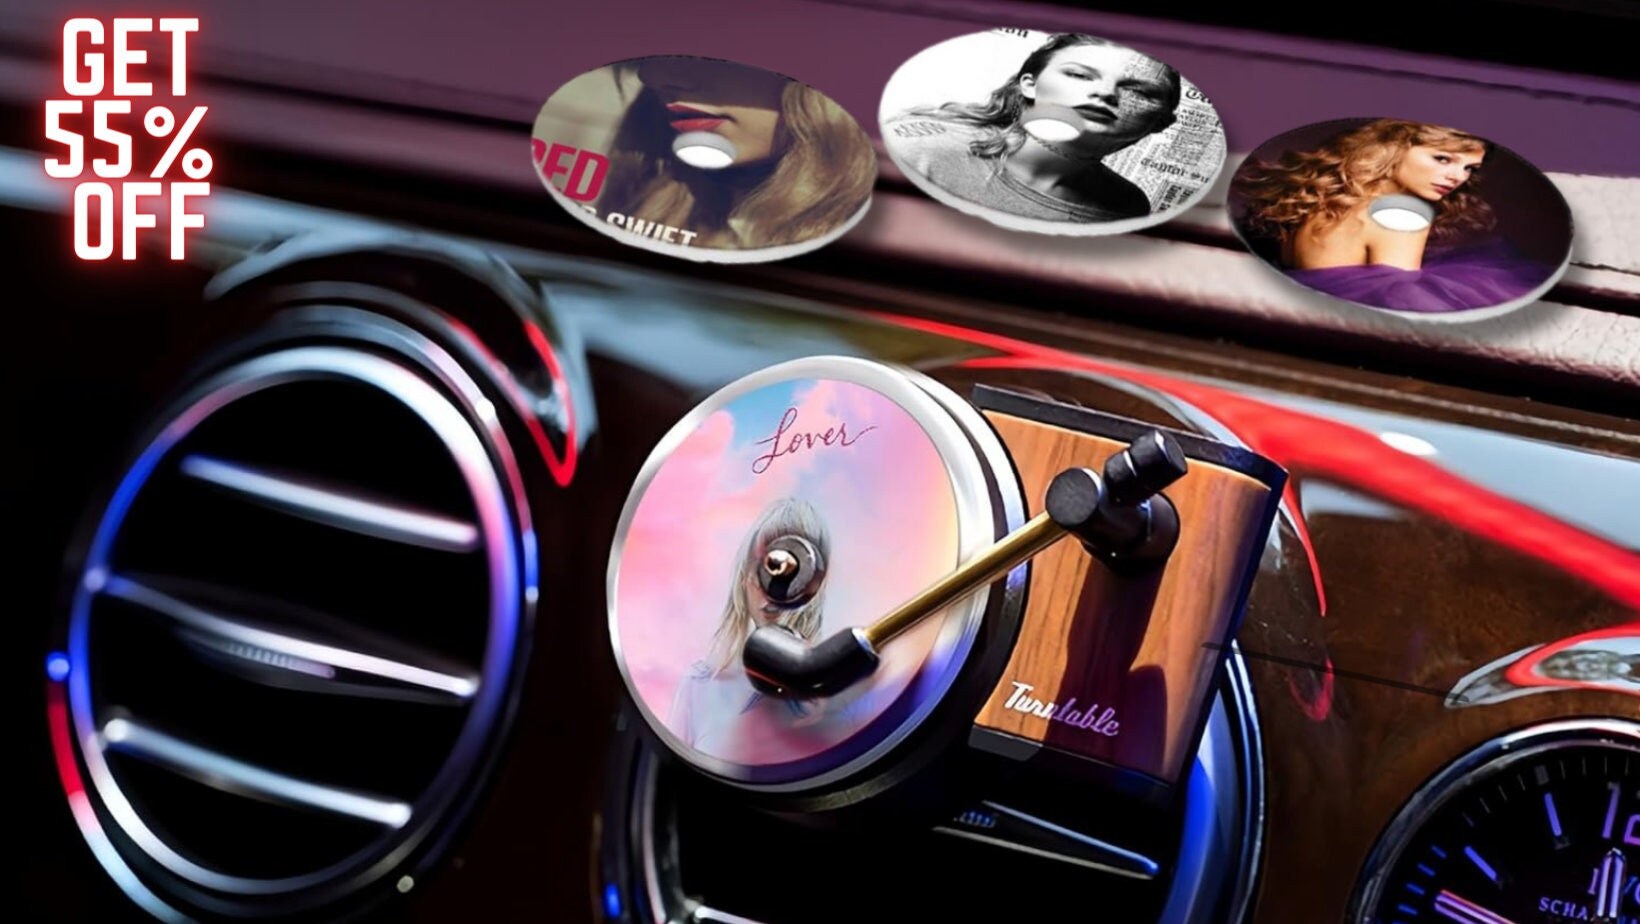  Taylor Turntable Car Air Freshener - Car Accessory for Music  Fans - Car Vent Clip and Record Player Design : Automotive